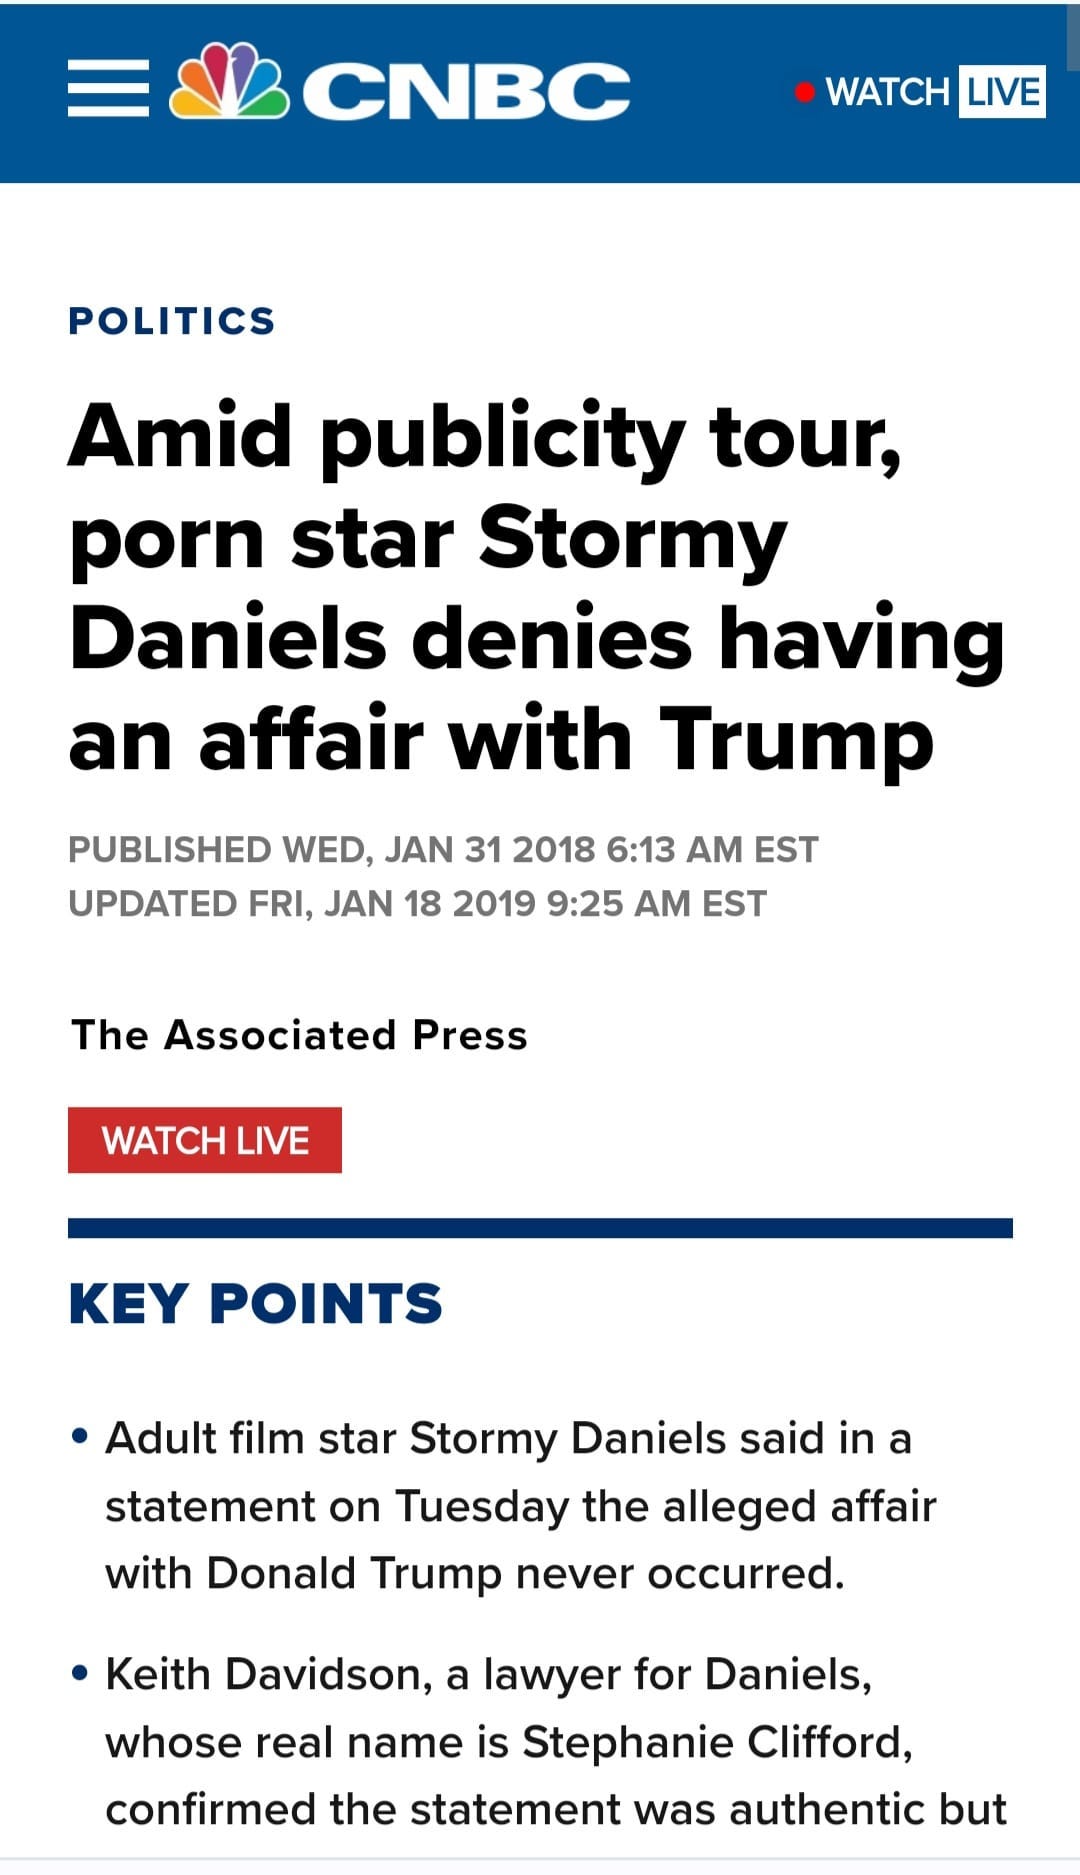 May be a Twitter screenshot of one or more people and text that says 'CNBC WATCH LIVE POLITICS Amid publicity tour, porn star Stormy Daniels denies having an affair with Trump PUBLISHED WED, JAN 31 2018 6:13 AM EST UPDATED FRI, JAN 18 2019 9:25 AM EST The Associated Press WATCH LIVE KEY POINTS Adult film star Stormy Daniels said in a statement on Tuesday the alleged affair with Donald Trump never occurred. Keith Davidson, a lawyer for Daniels, whose real name is Stephanie Clifford, confirmed the statement was authentic but'